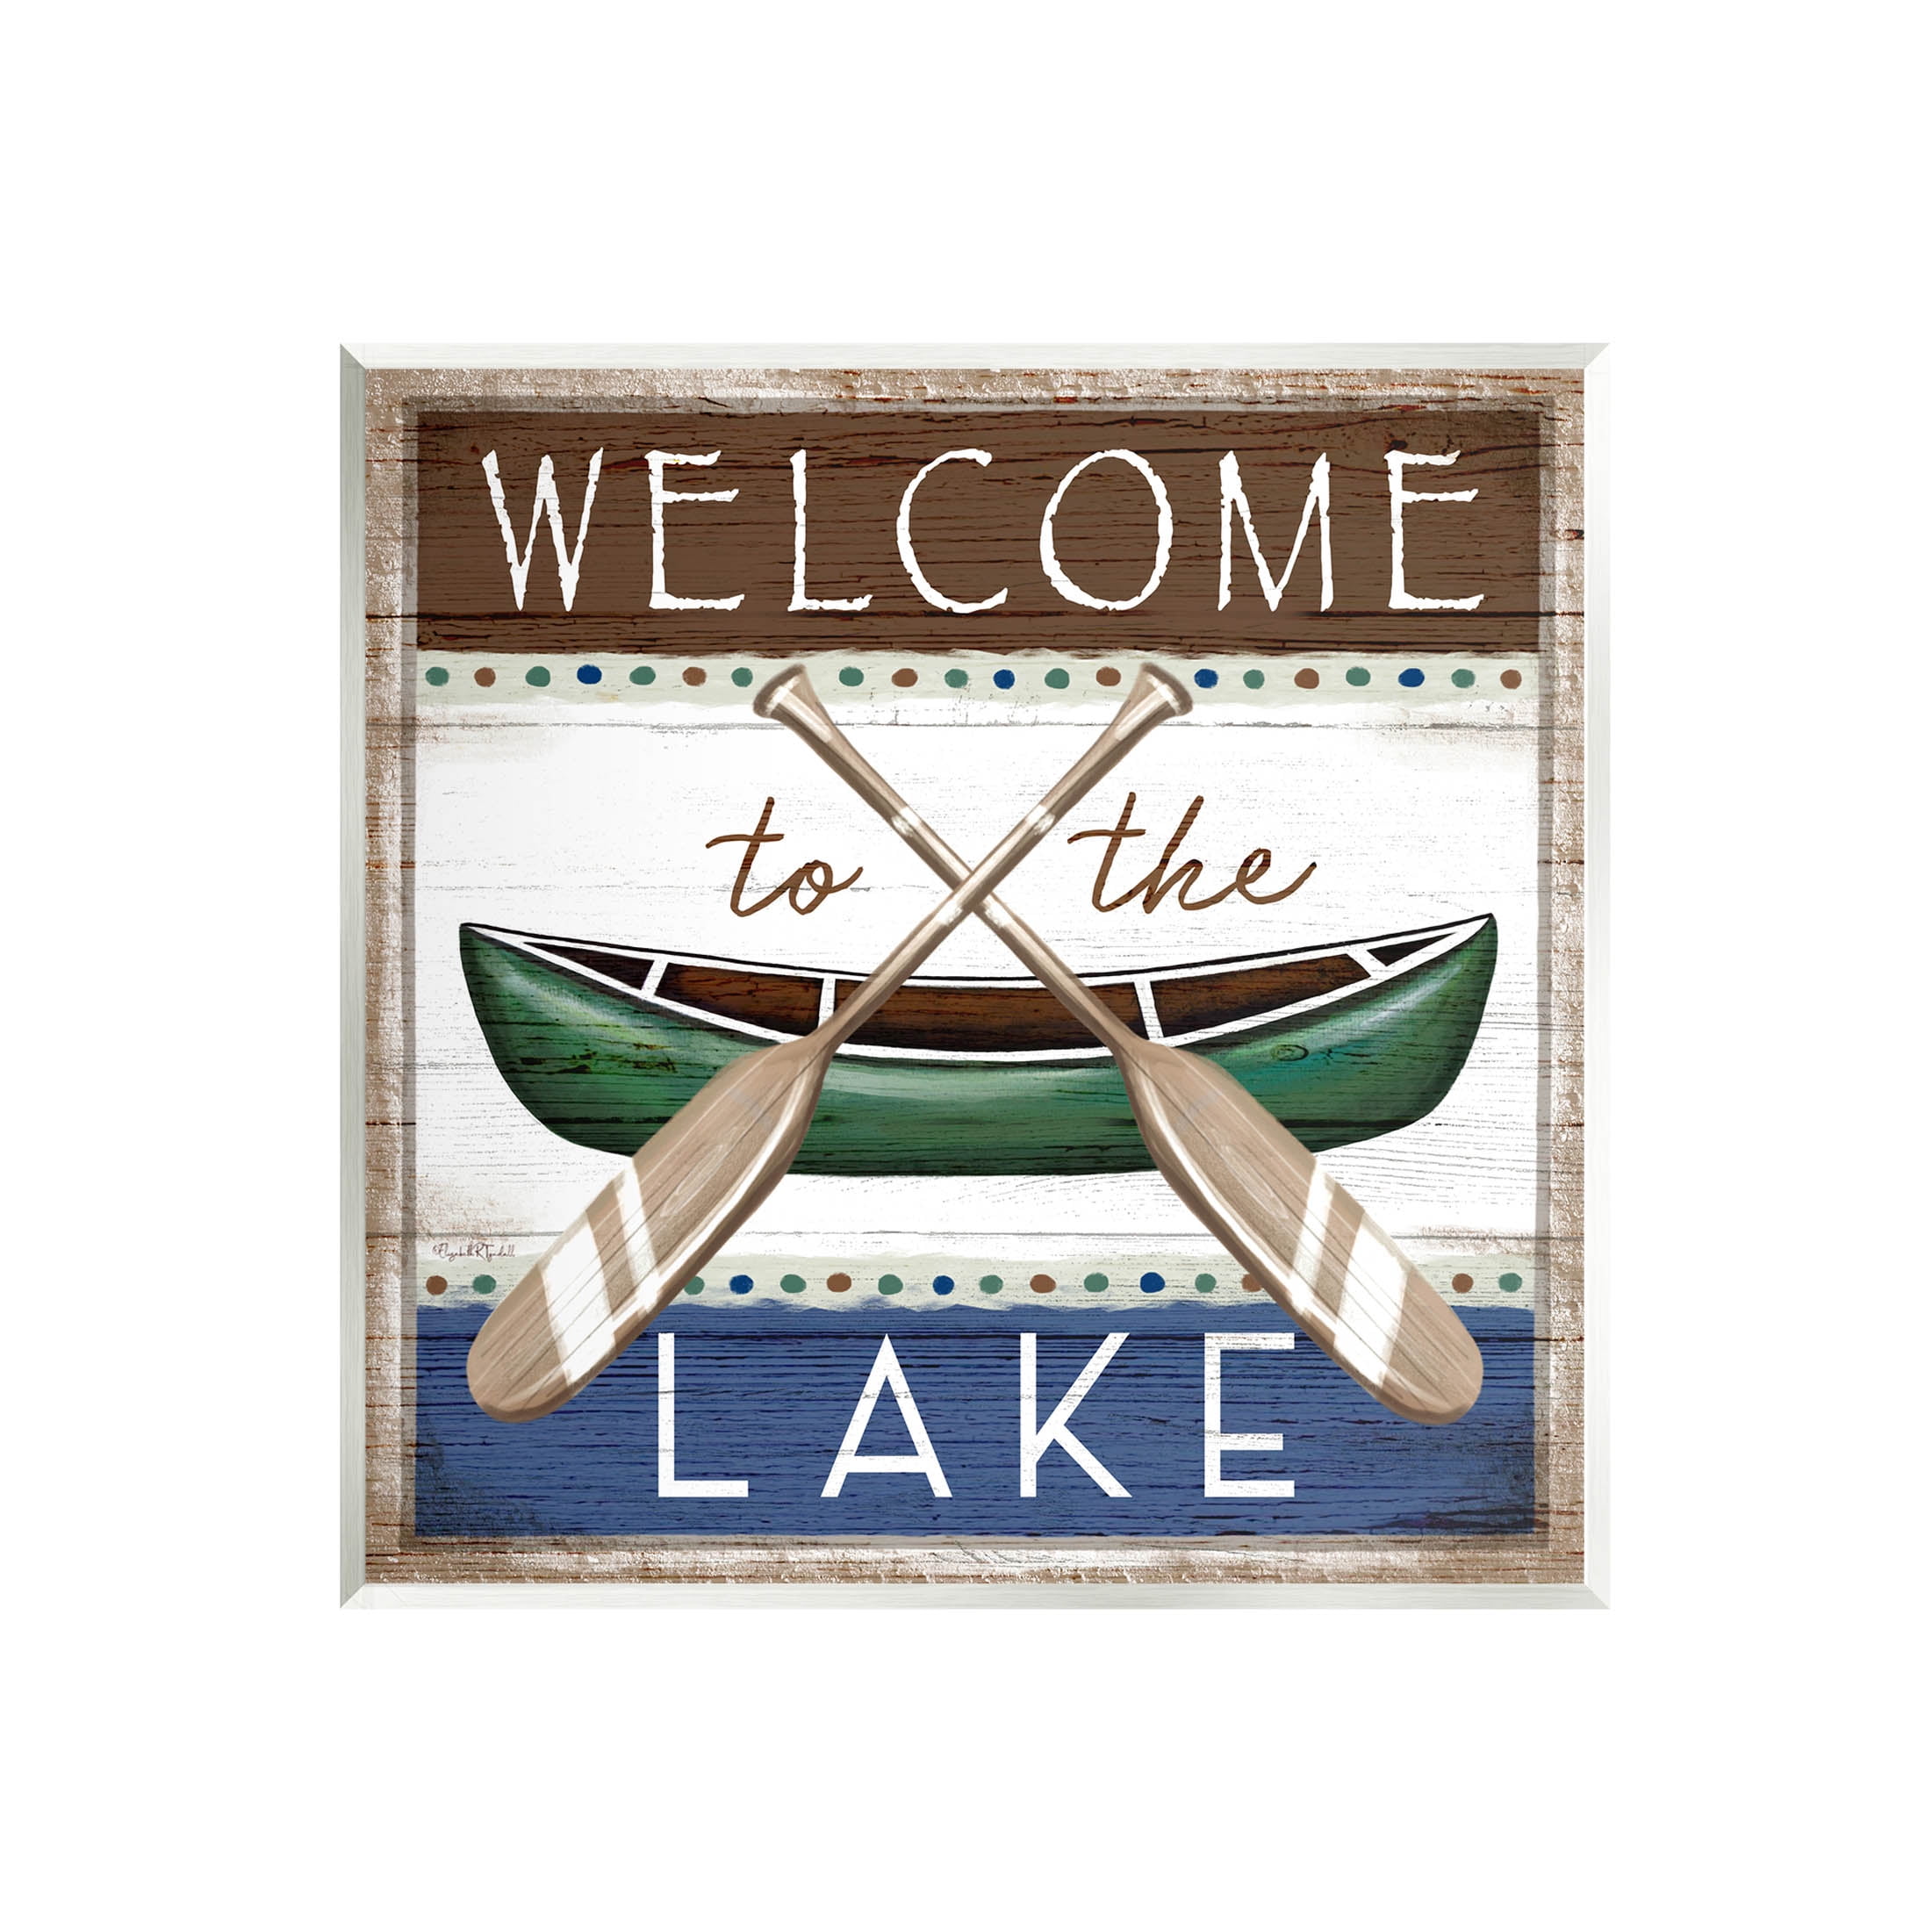 12x8 Inches Funny Fishing Metal Sign For Lake House Farmhouse Kitchen Wall  Decor Educational And Important From Pgmp, $10.95